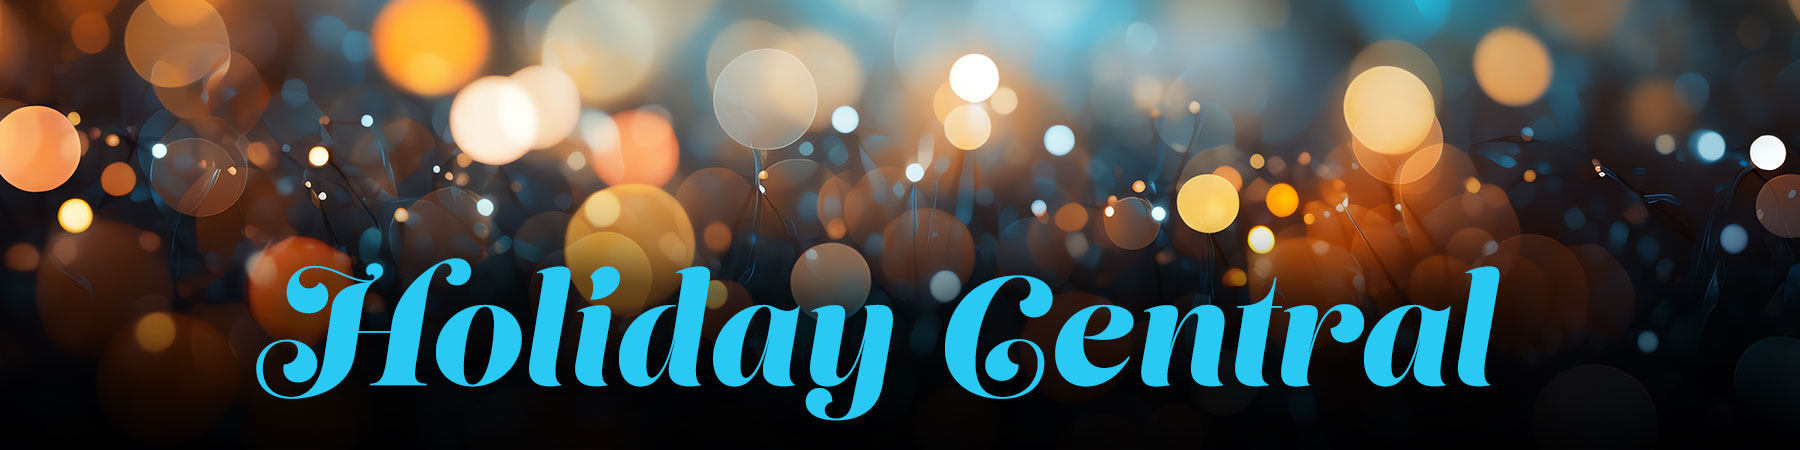 Bright blue text "Holiday Central" imposed over dazzling out of focus string lights